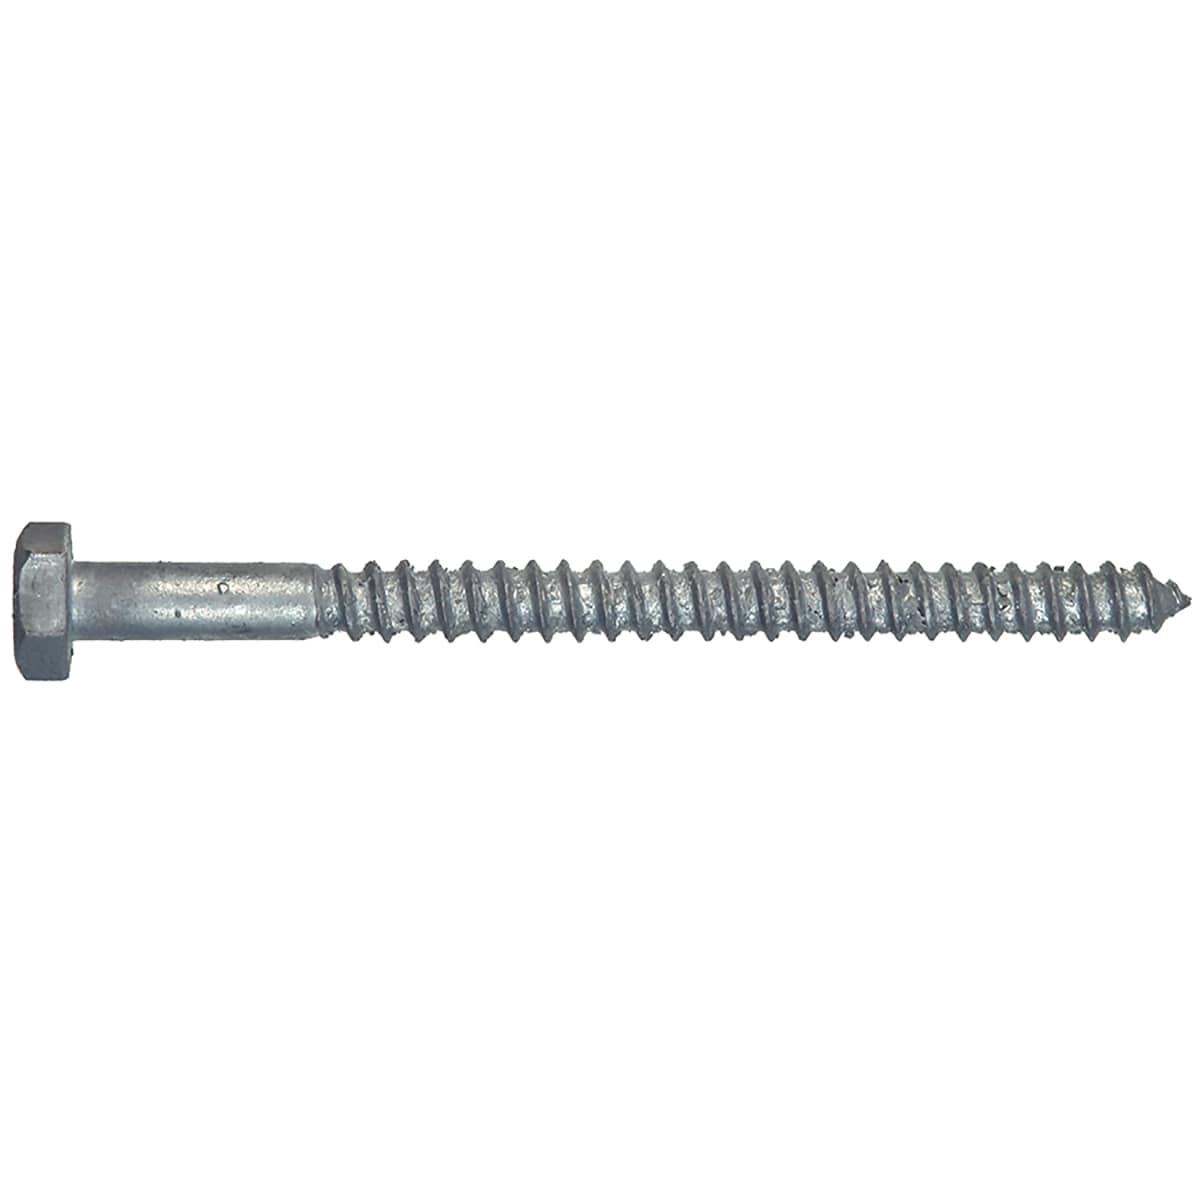 1/2” Hot Dipped Galvanized Lag Bolts Washers Included 